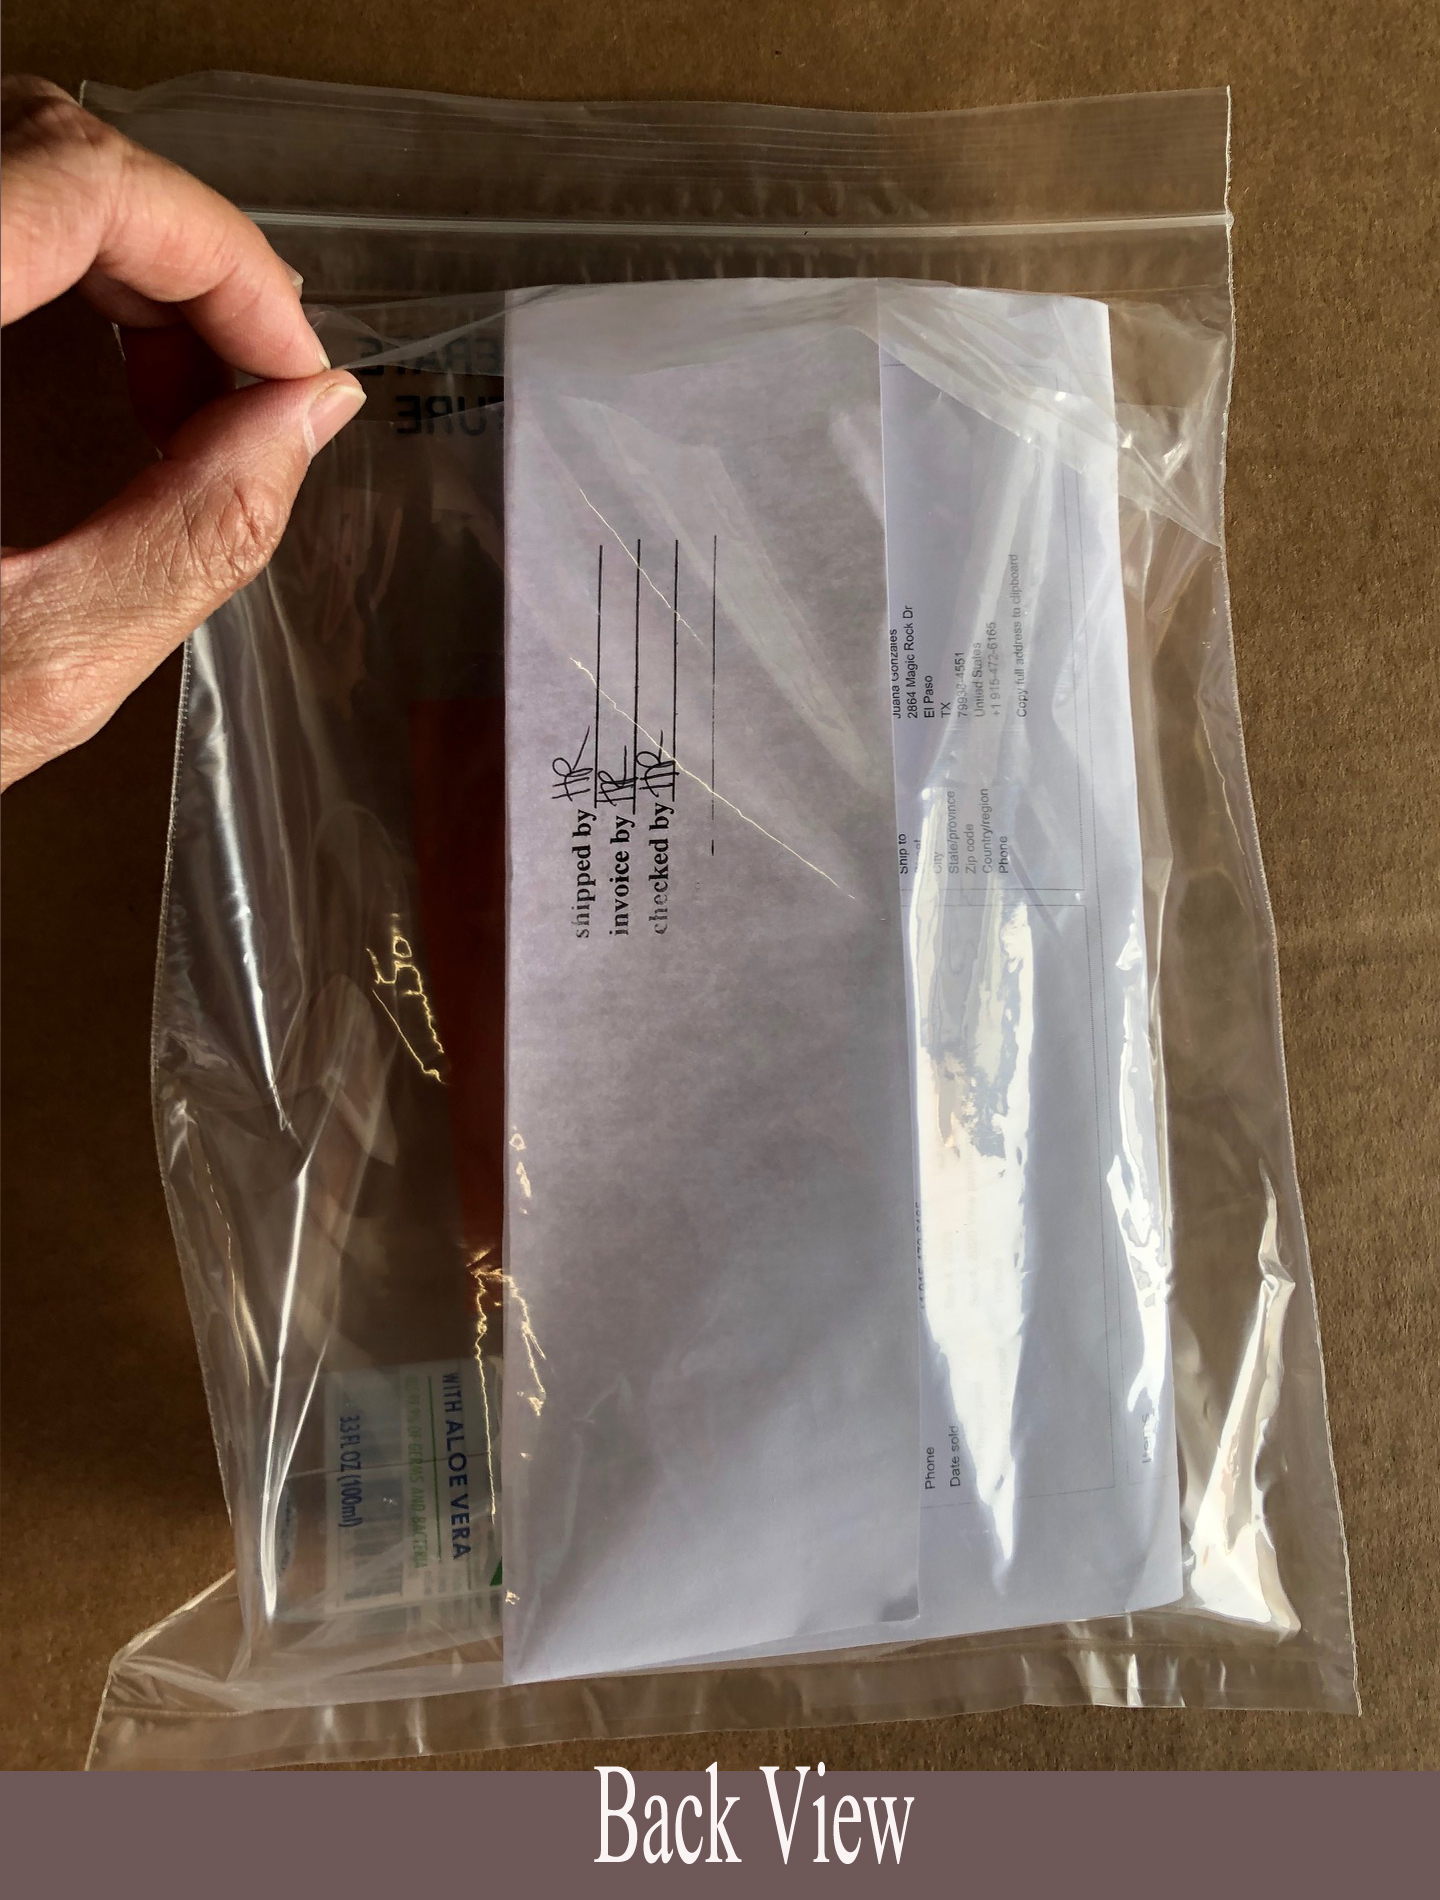 Resealable Cello Lip and Tape Self Sealing Bags - Lip and Tape Self Sealing  Bags are Resealable - Easy to Fill Seal and are Reusable